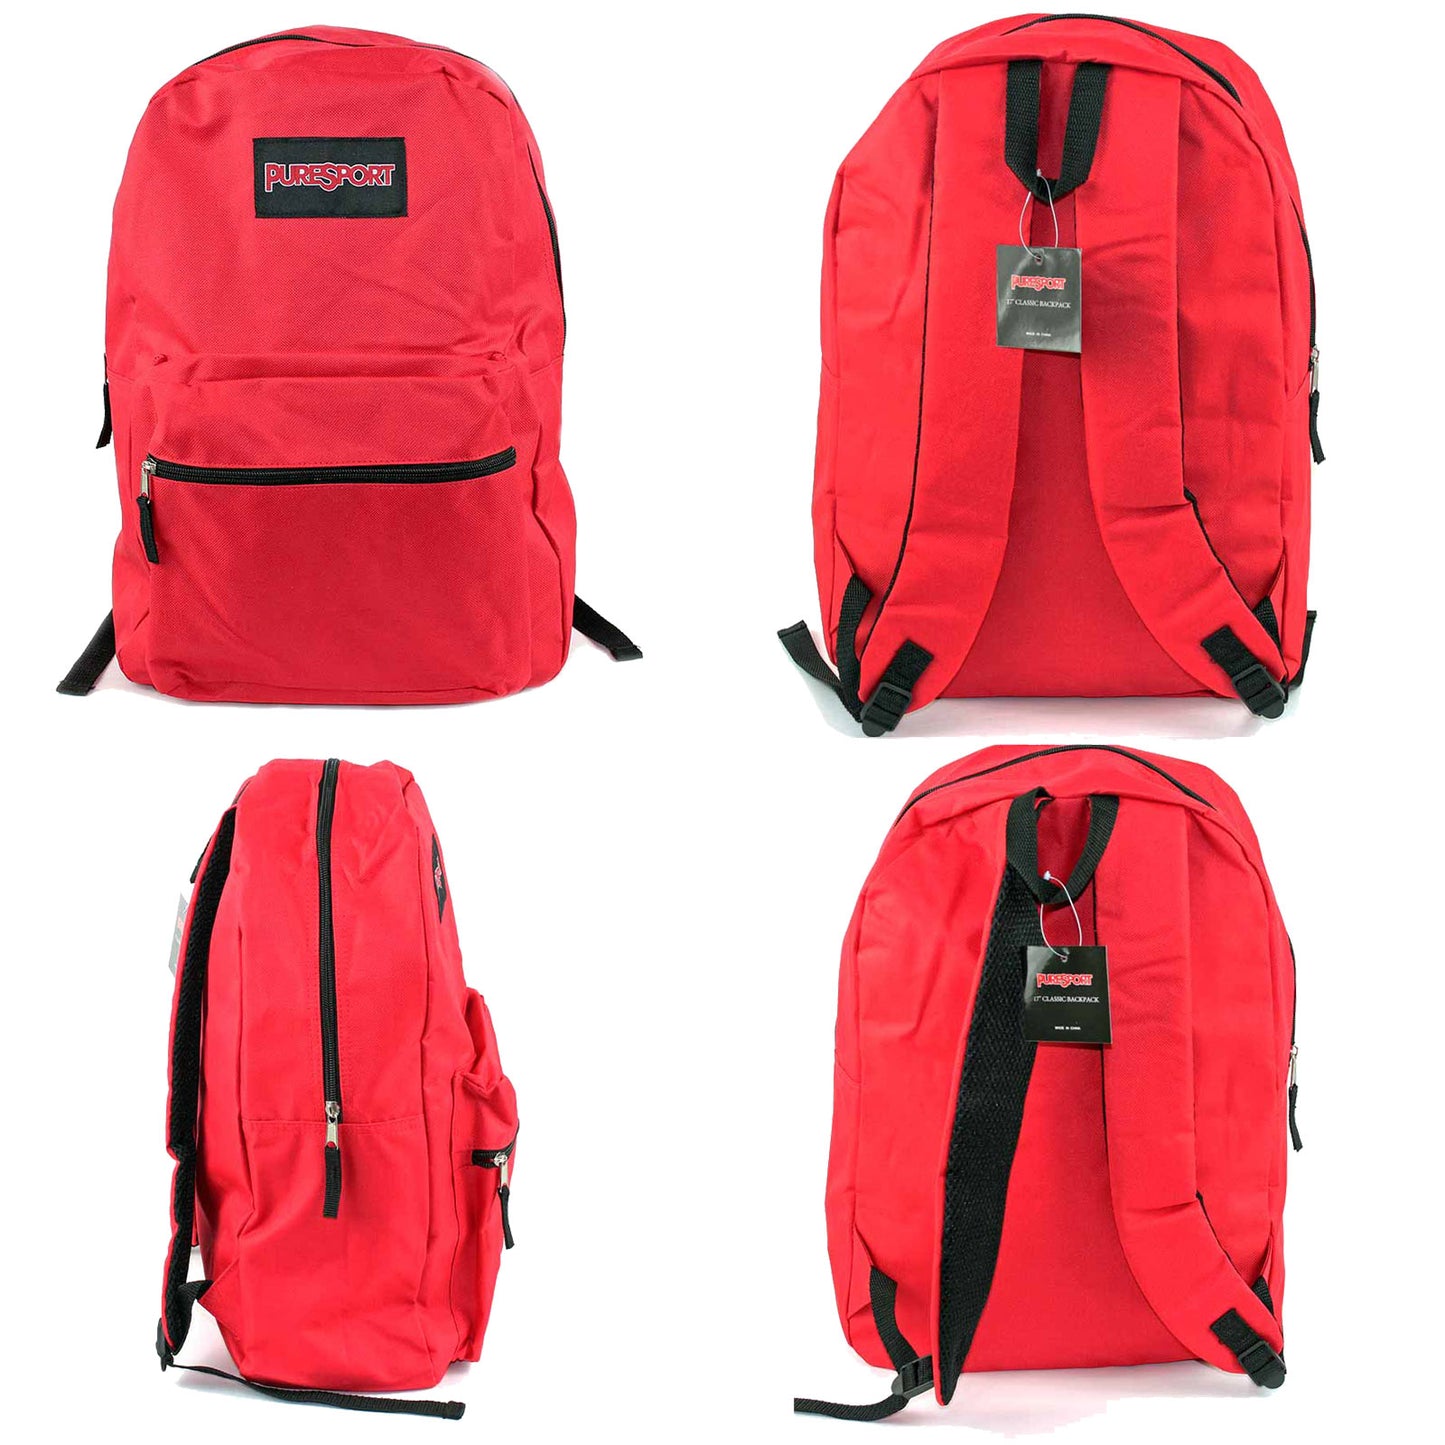 back-to-school-wholesale-backpacks-in-red-donation-book-bags